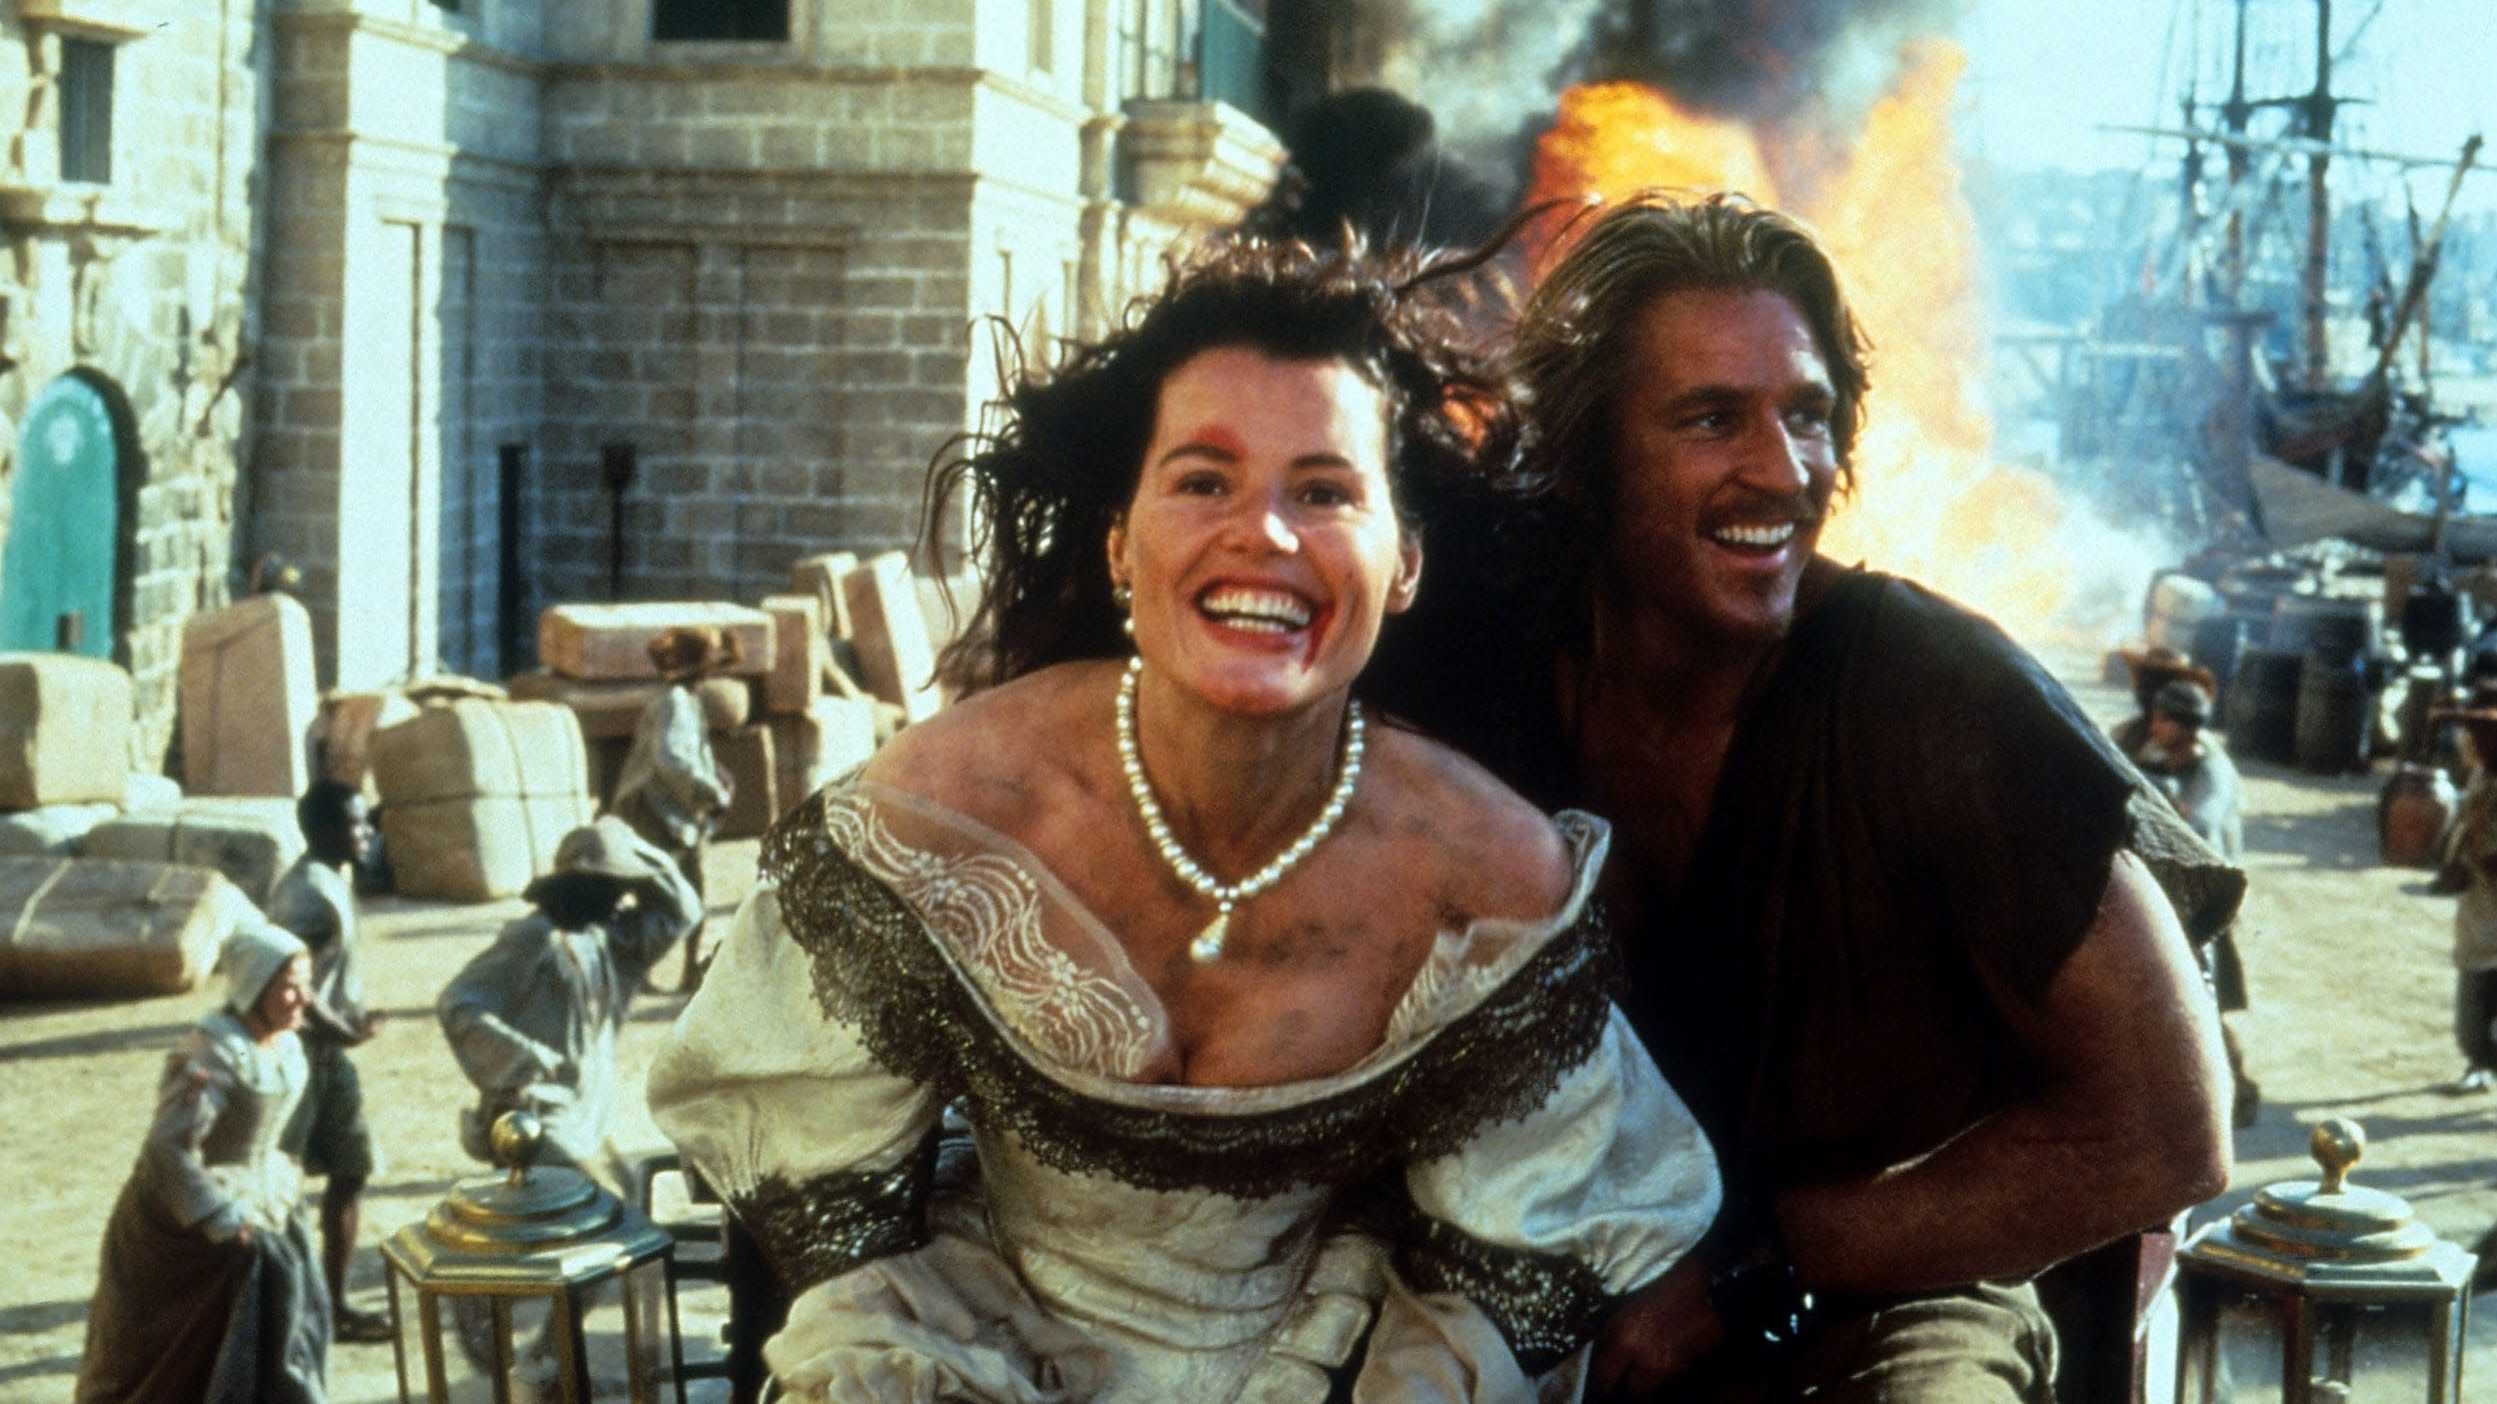 Just look at the joy on her face. That's the face of a happy pirate. (Image: Carolco Pictures)